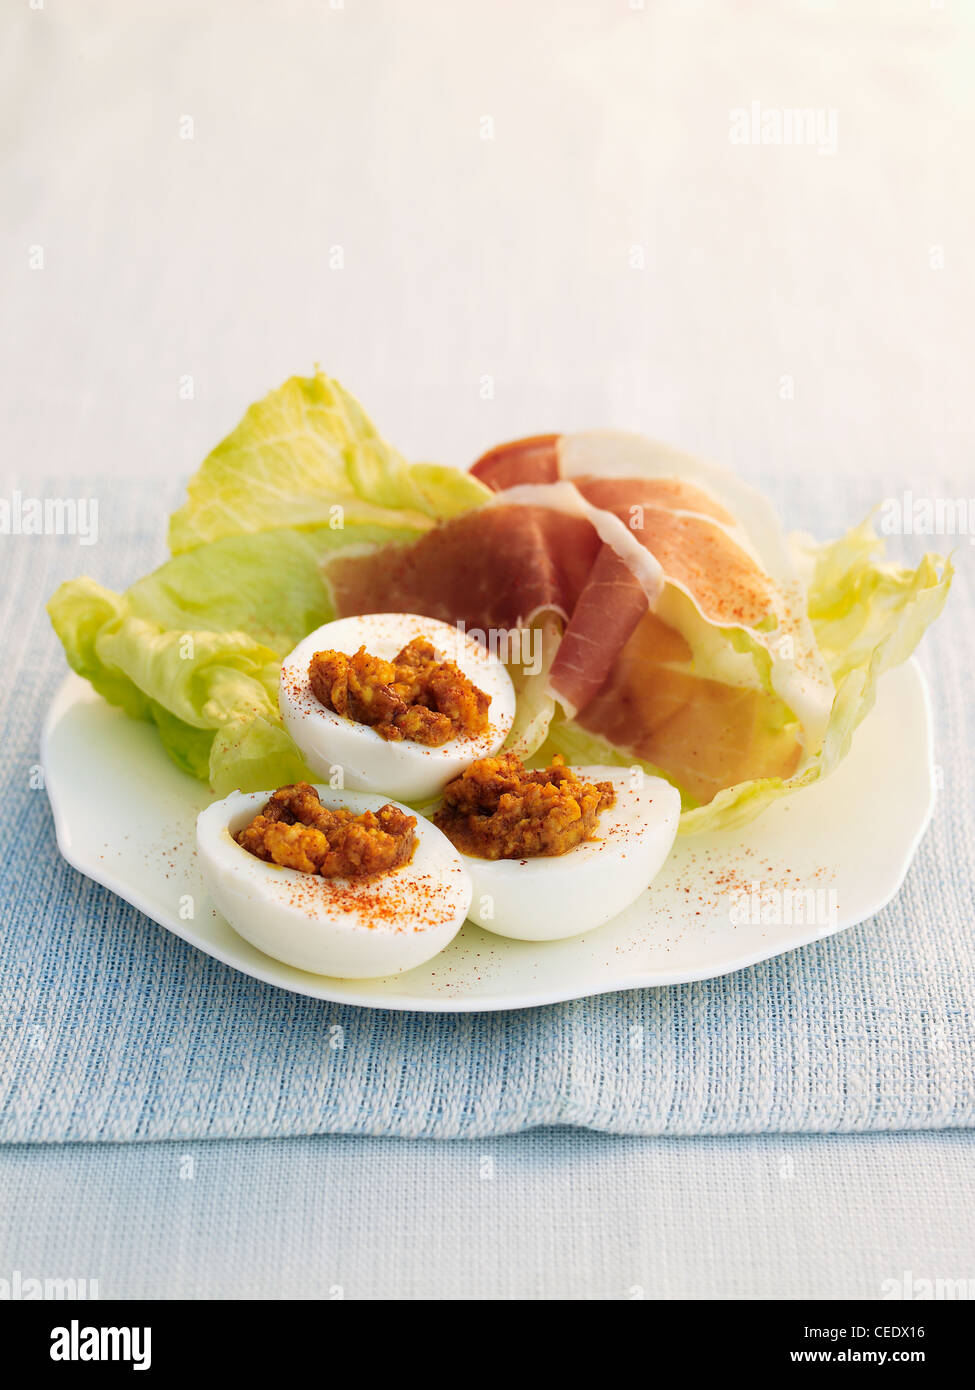 Curried eggs served with lettuce and parma ham Stock Photo